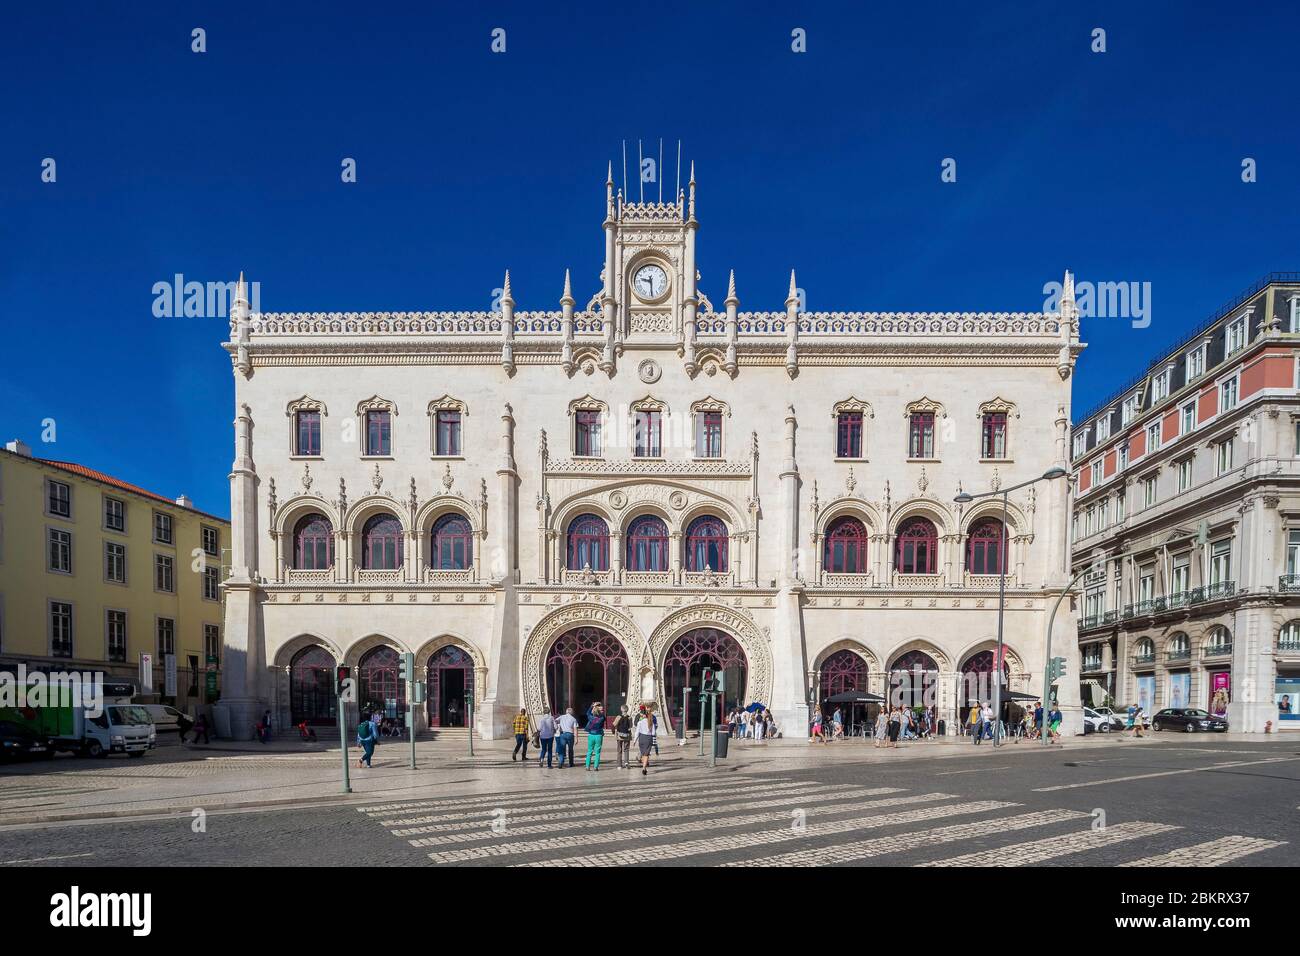 Portugal, Lisbon, Baixa, Rossio station built between 1888 and 1890 is a subtle blend of art deco and traditional Portuguese architecture (Manuelian style) Stock Photo